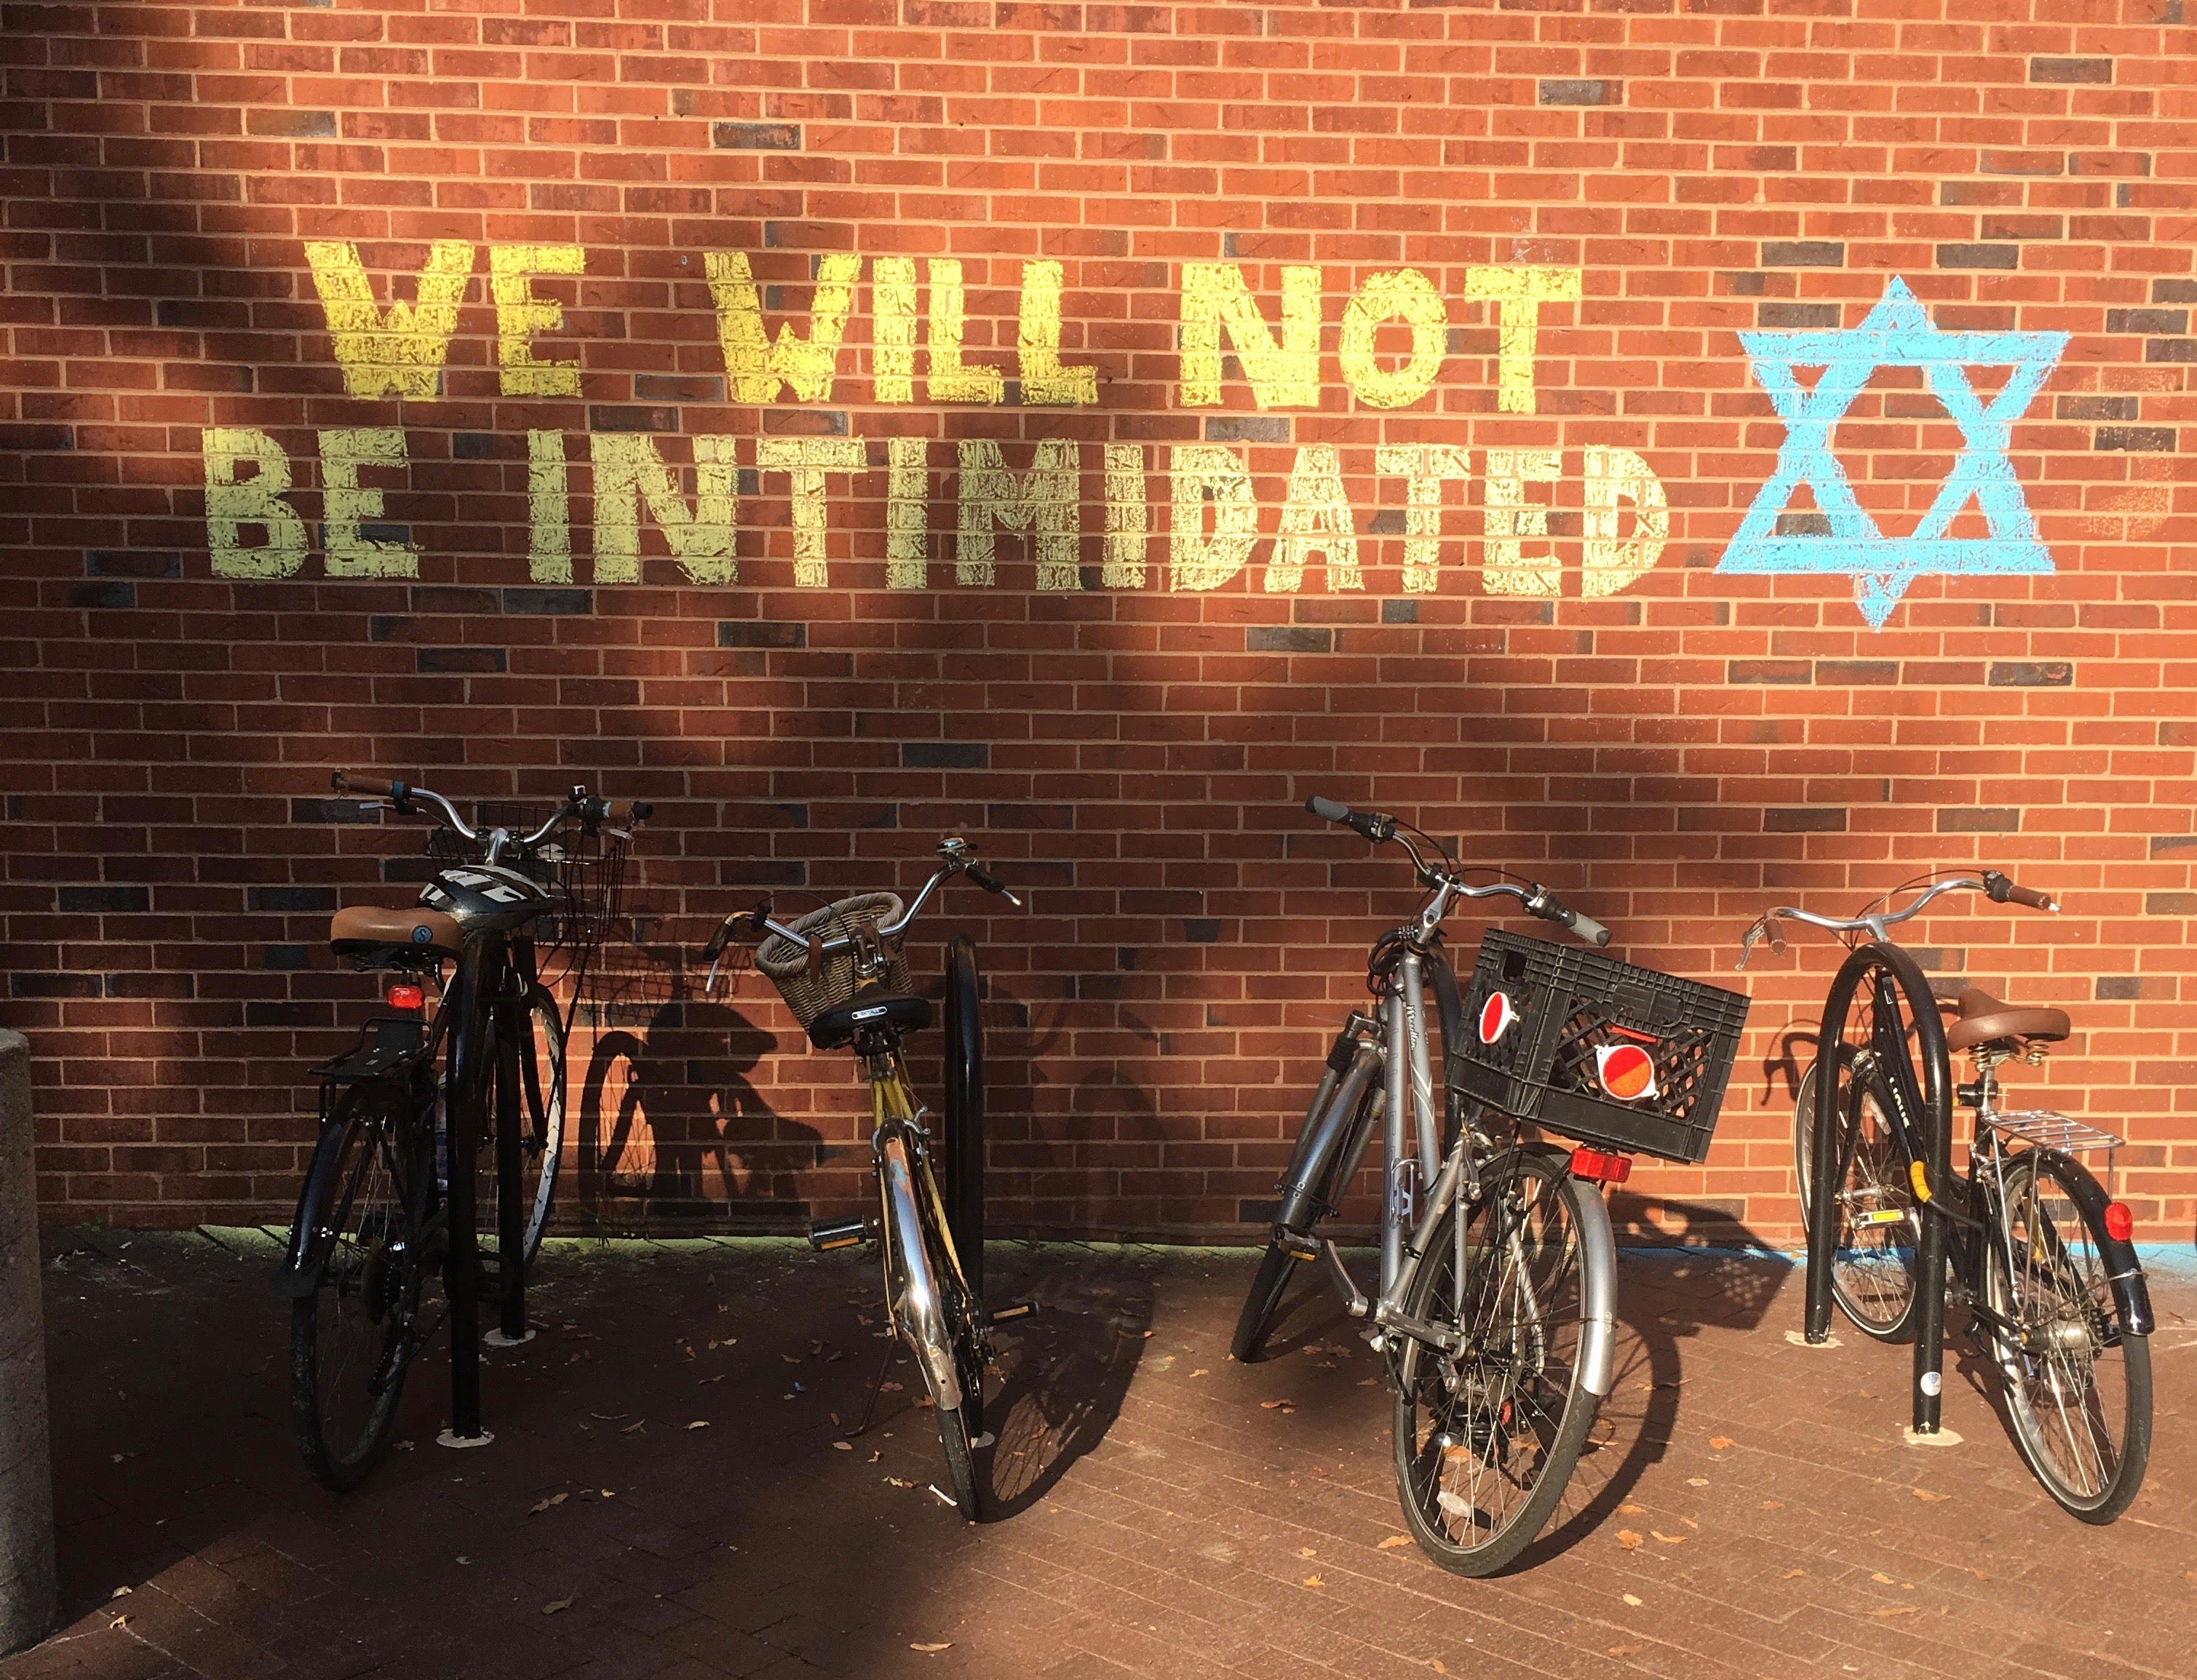 The words "We will not be intimidated" is written in chalk next to a Star of David on a red brick wall